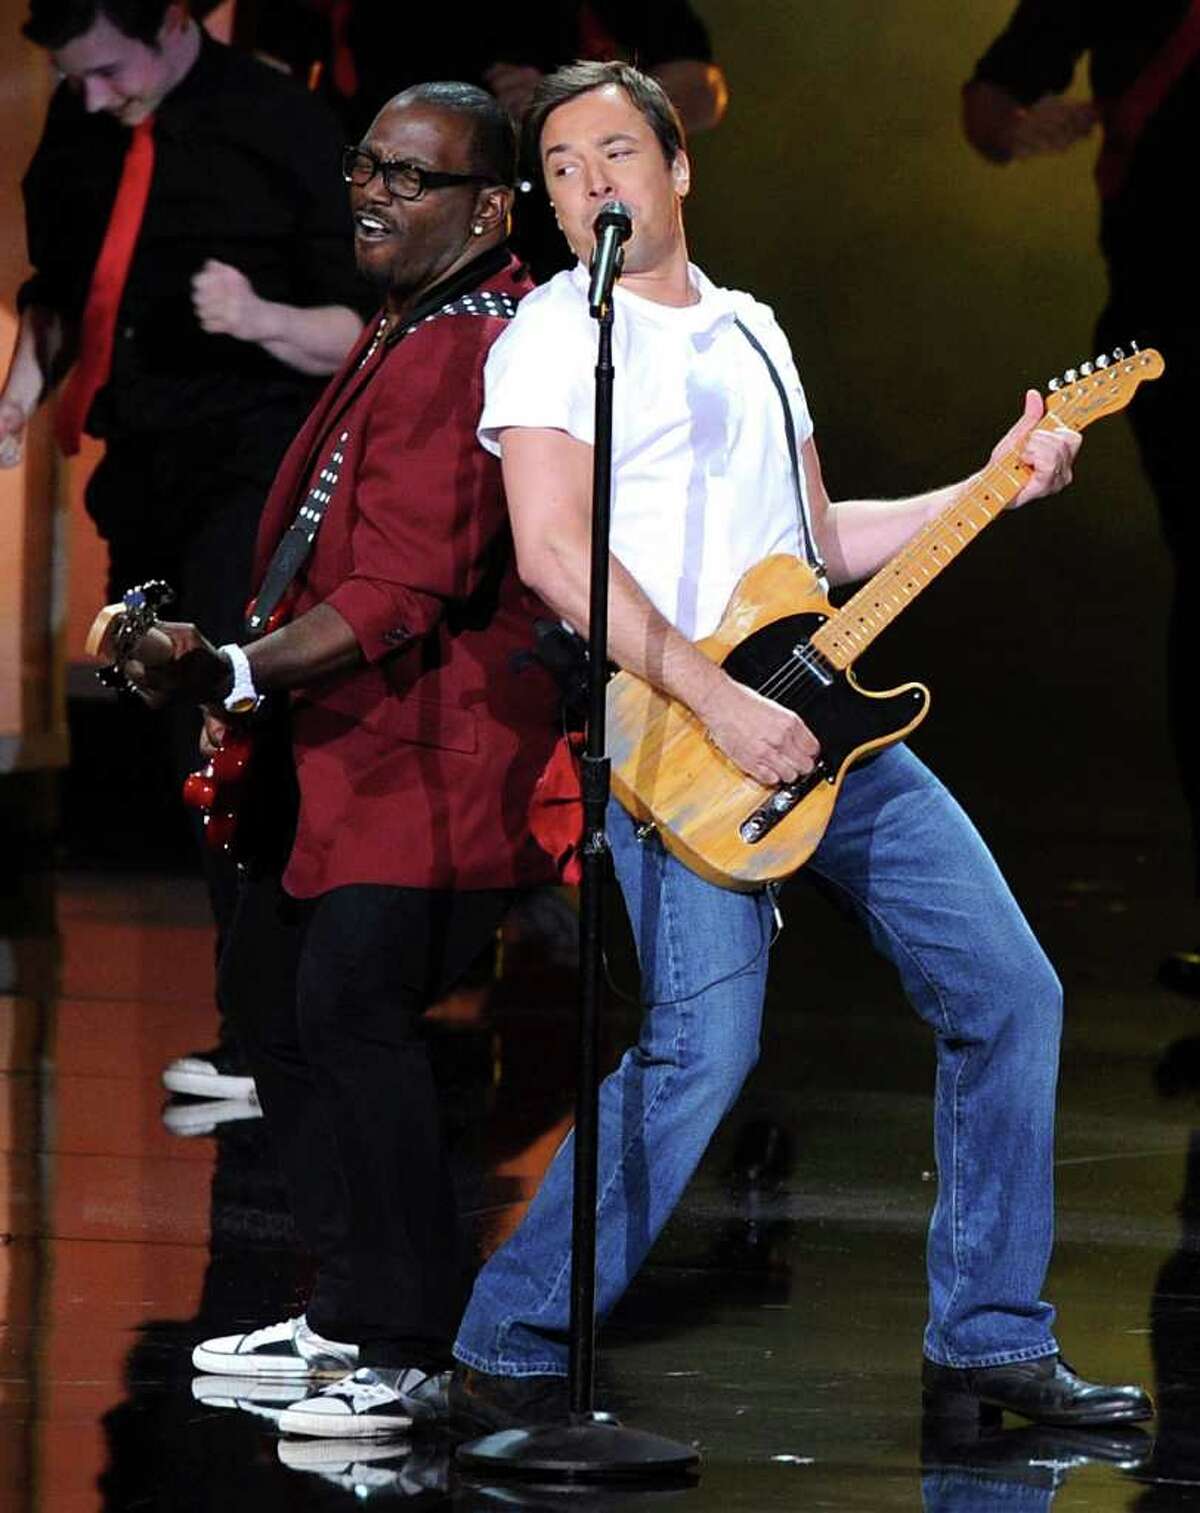 LOS ANGELES, CA - AUGUST 29: Musician Randy Jackson (L) and host Jimmy Fallon perform onstage at the 62nd Annual Primetime Emmy Awards held at the Nokia Theatre L.A. Live on August 29, 2010 in Los Angeles, California. (Photo by Kevin Winter/Getty Images) *** Local Caption *** Randy Jackson;Jimmy Fallon